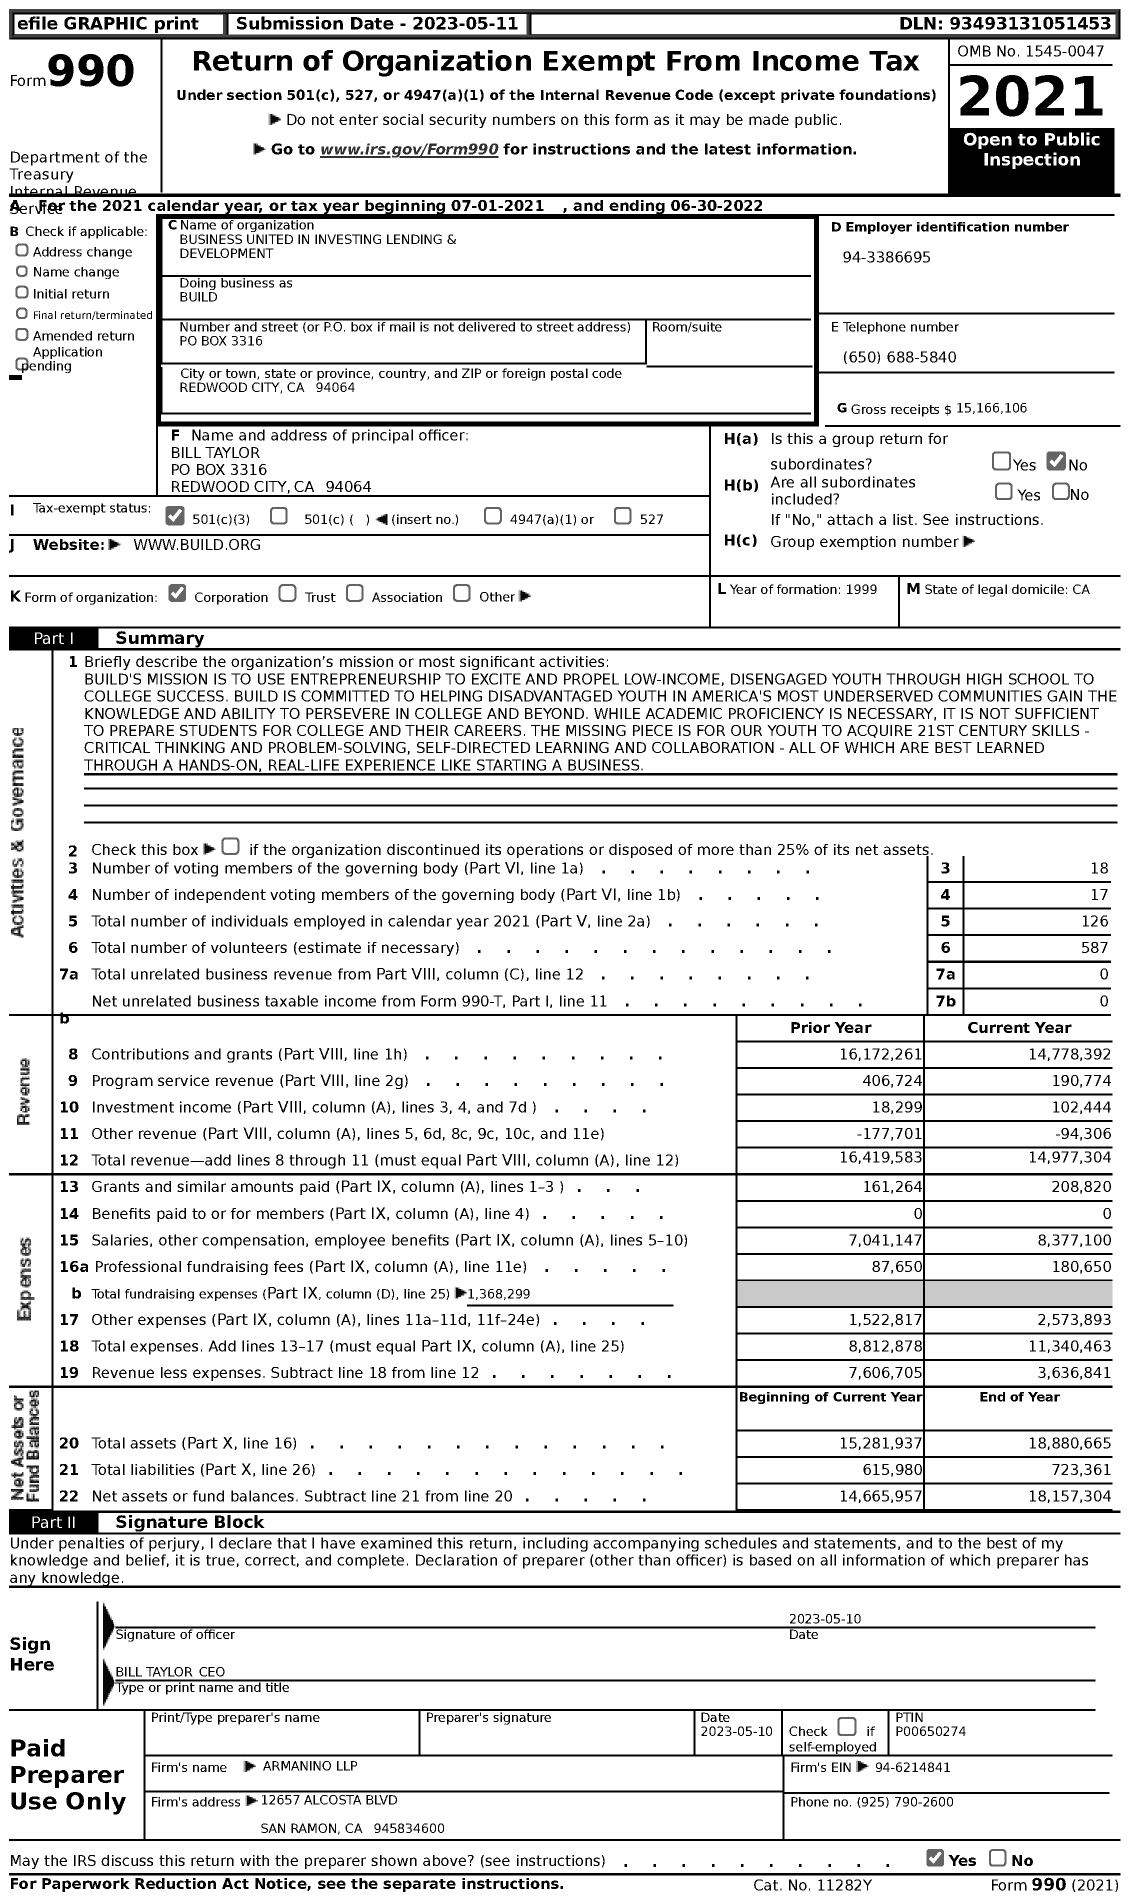 Image of first page of 2021 Form 990 for Businesses United in Investing Lending and Development Build (BUILD)